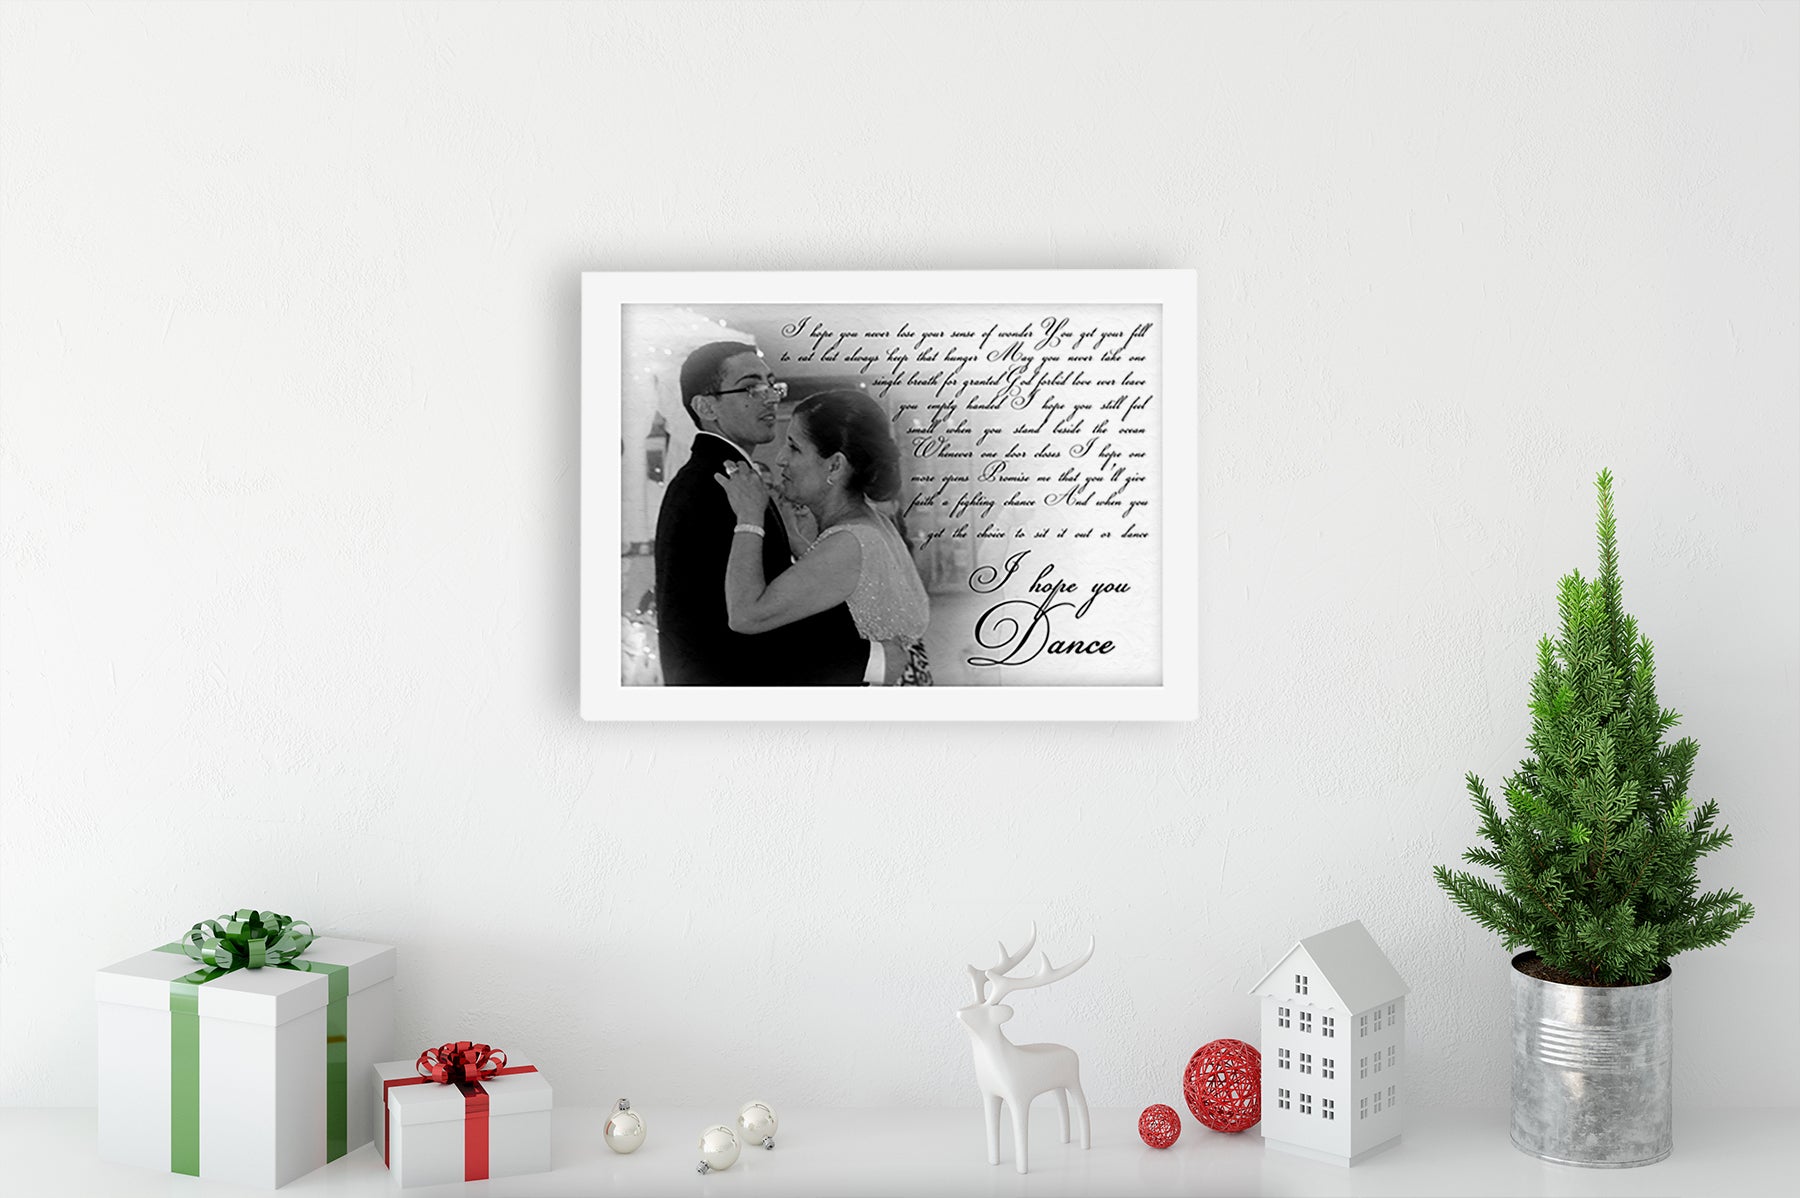 Personalized mother and son photo gift wall decor